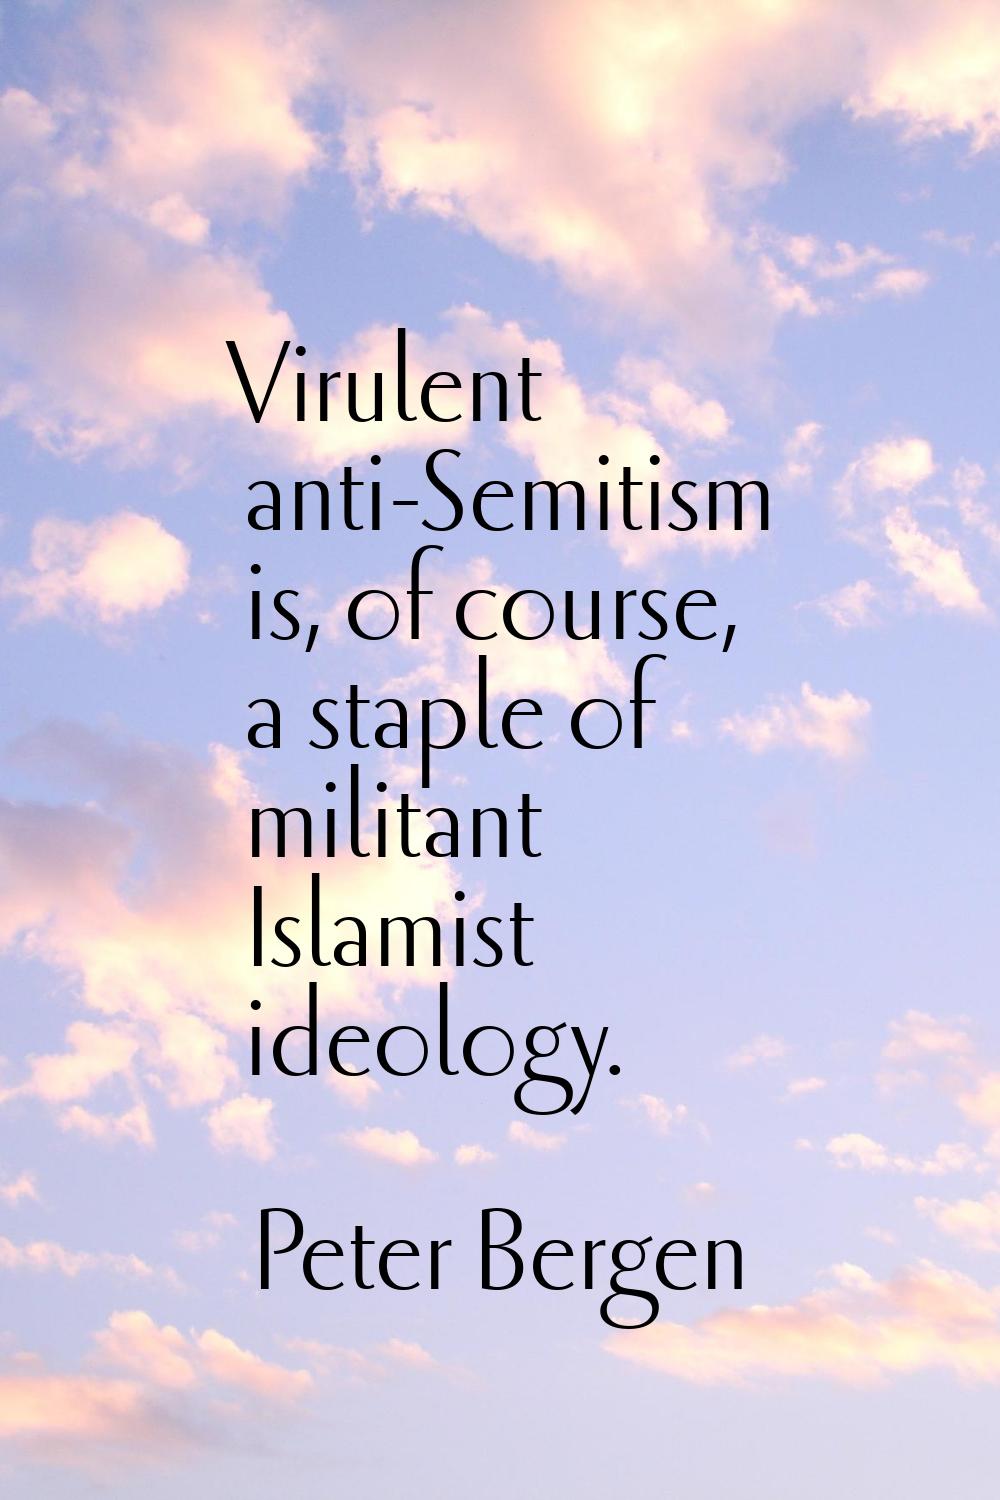 Virulent anti-Semitism is, of course, a staple of militant Islamist ideology.